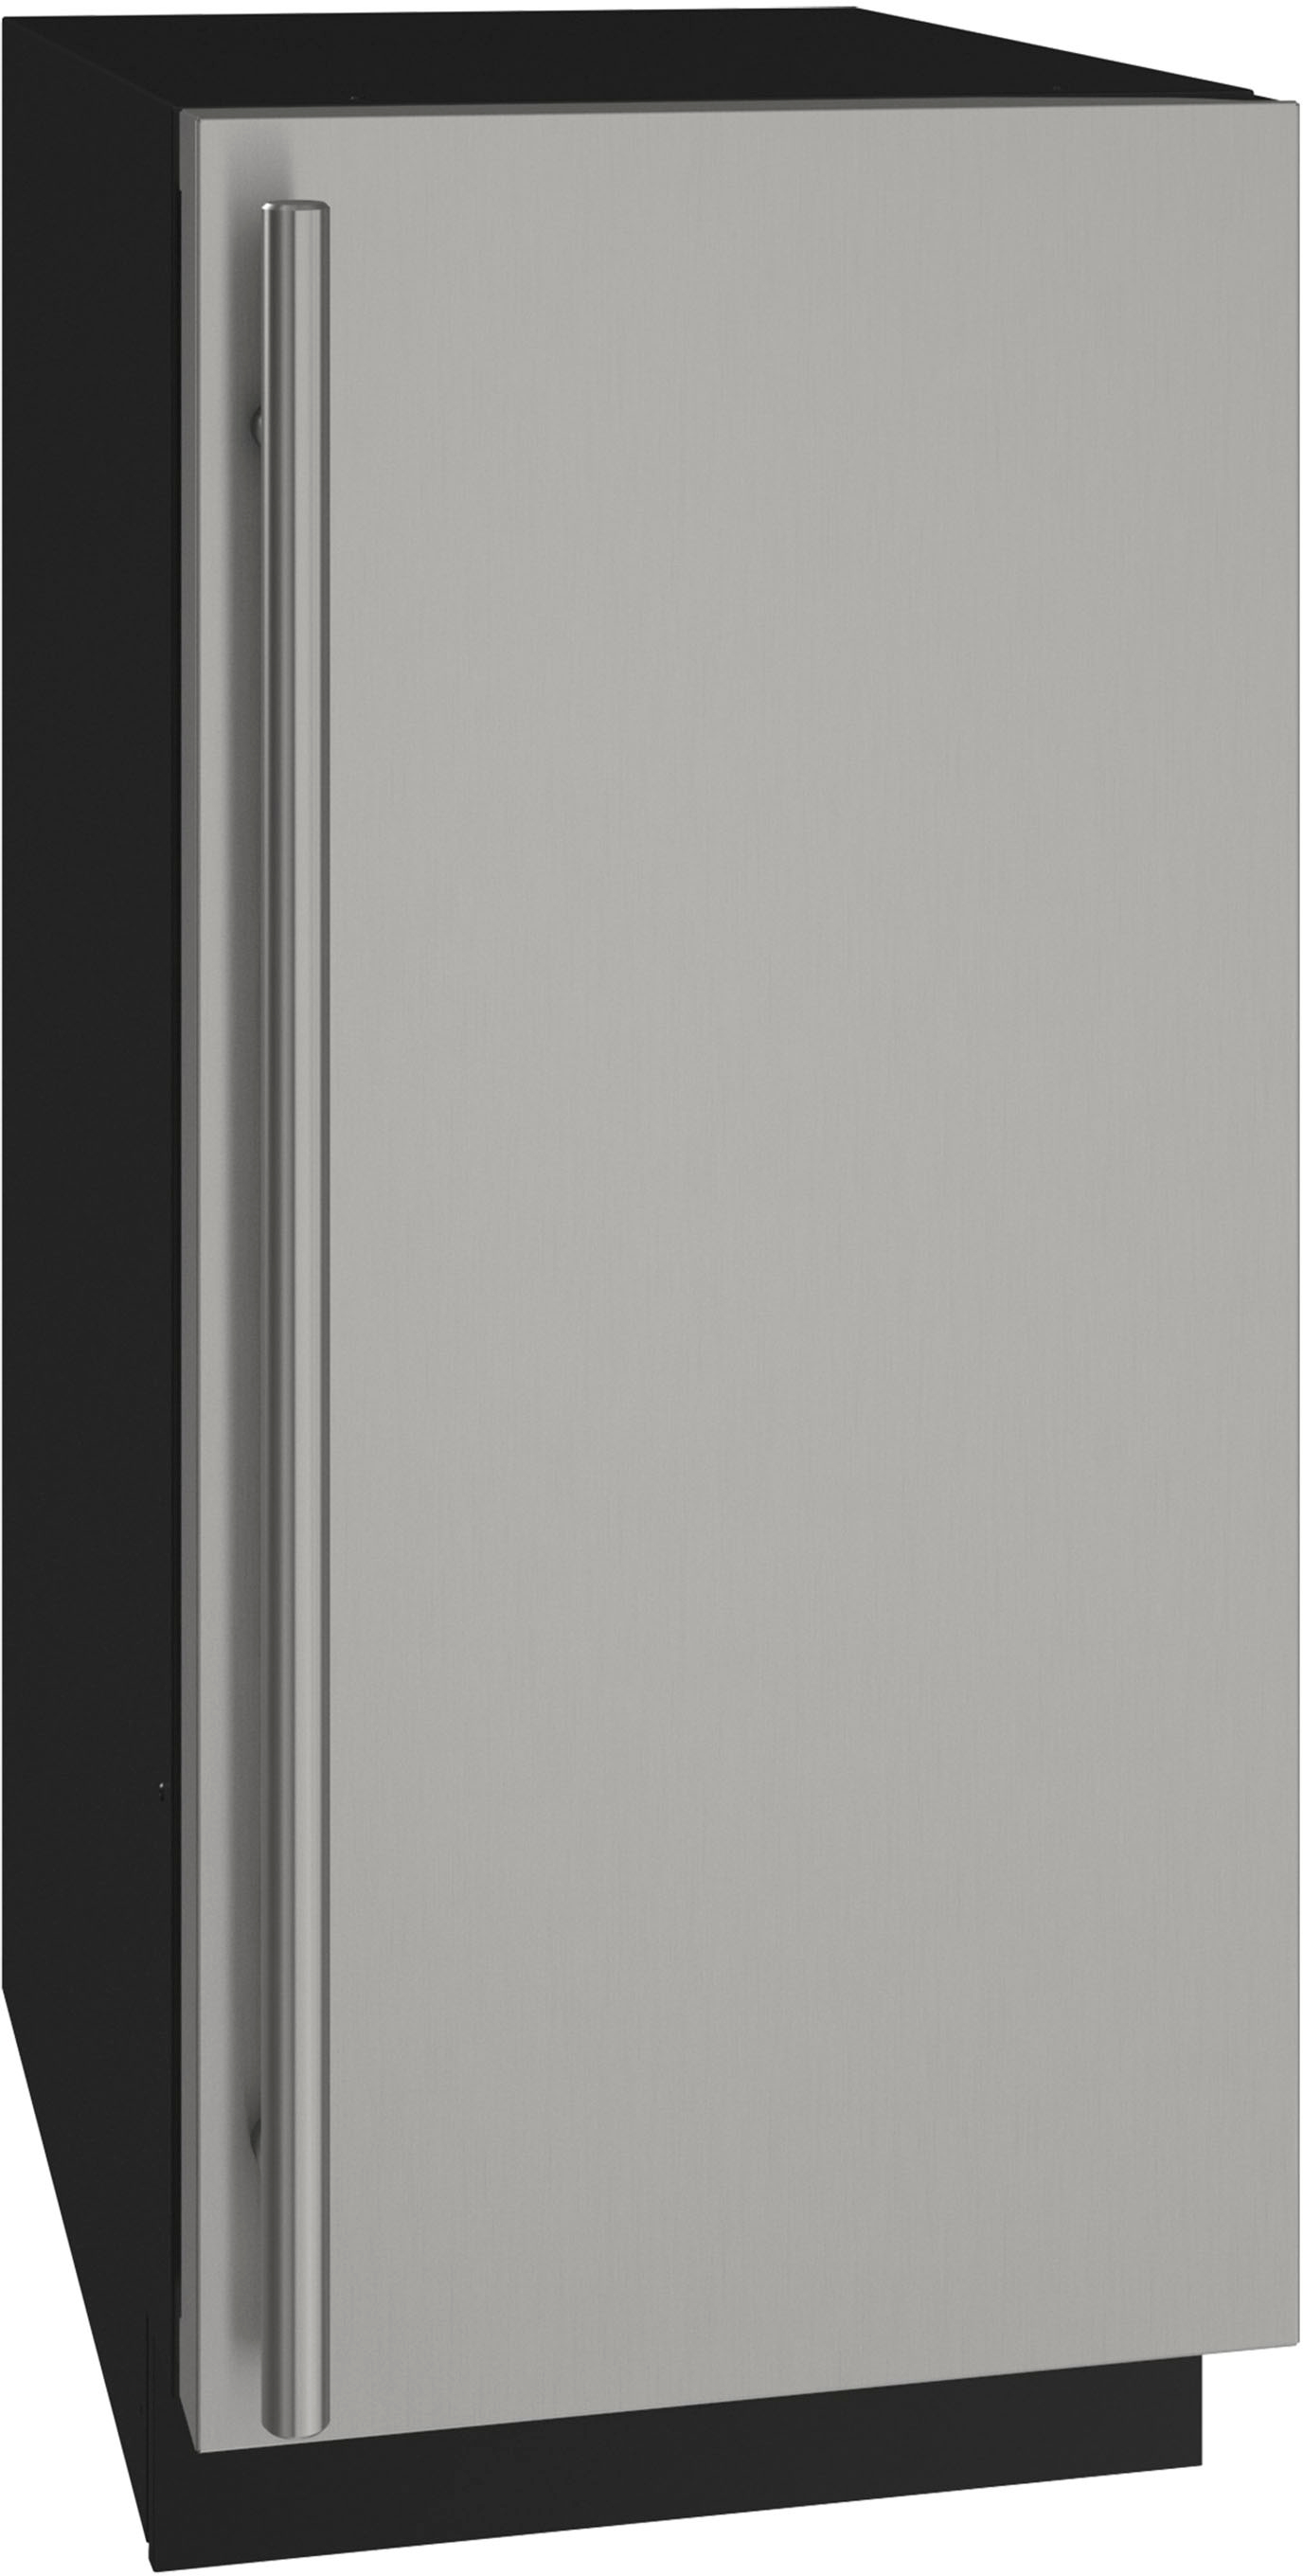 Angle View: U-Line - 15" 30-Lb Freestanding Icemaker - Stainless Steel